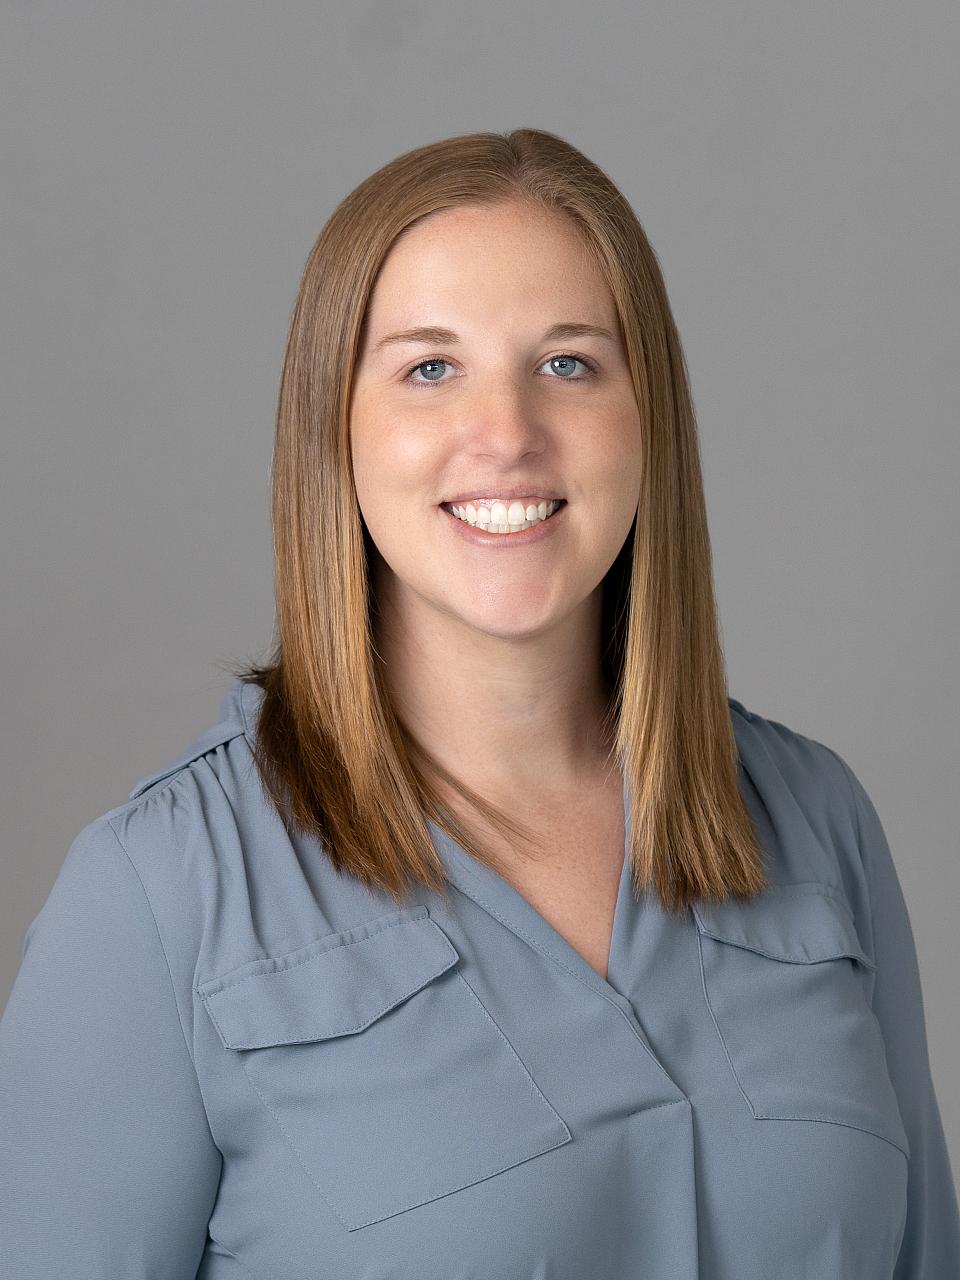 Photo of a woman, Dr. Alison Brann, with brown hair wearing a blue-gray shirt smiling at the camera.